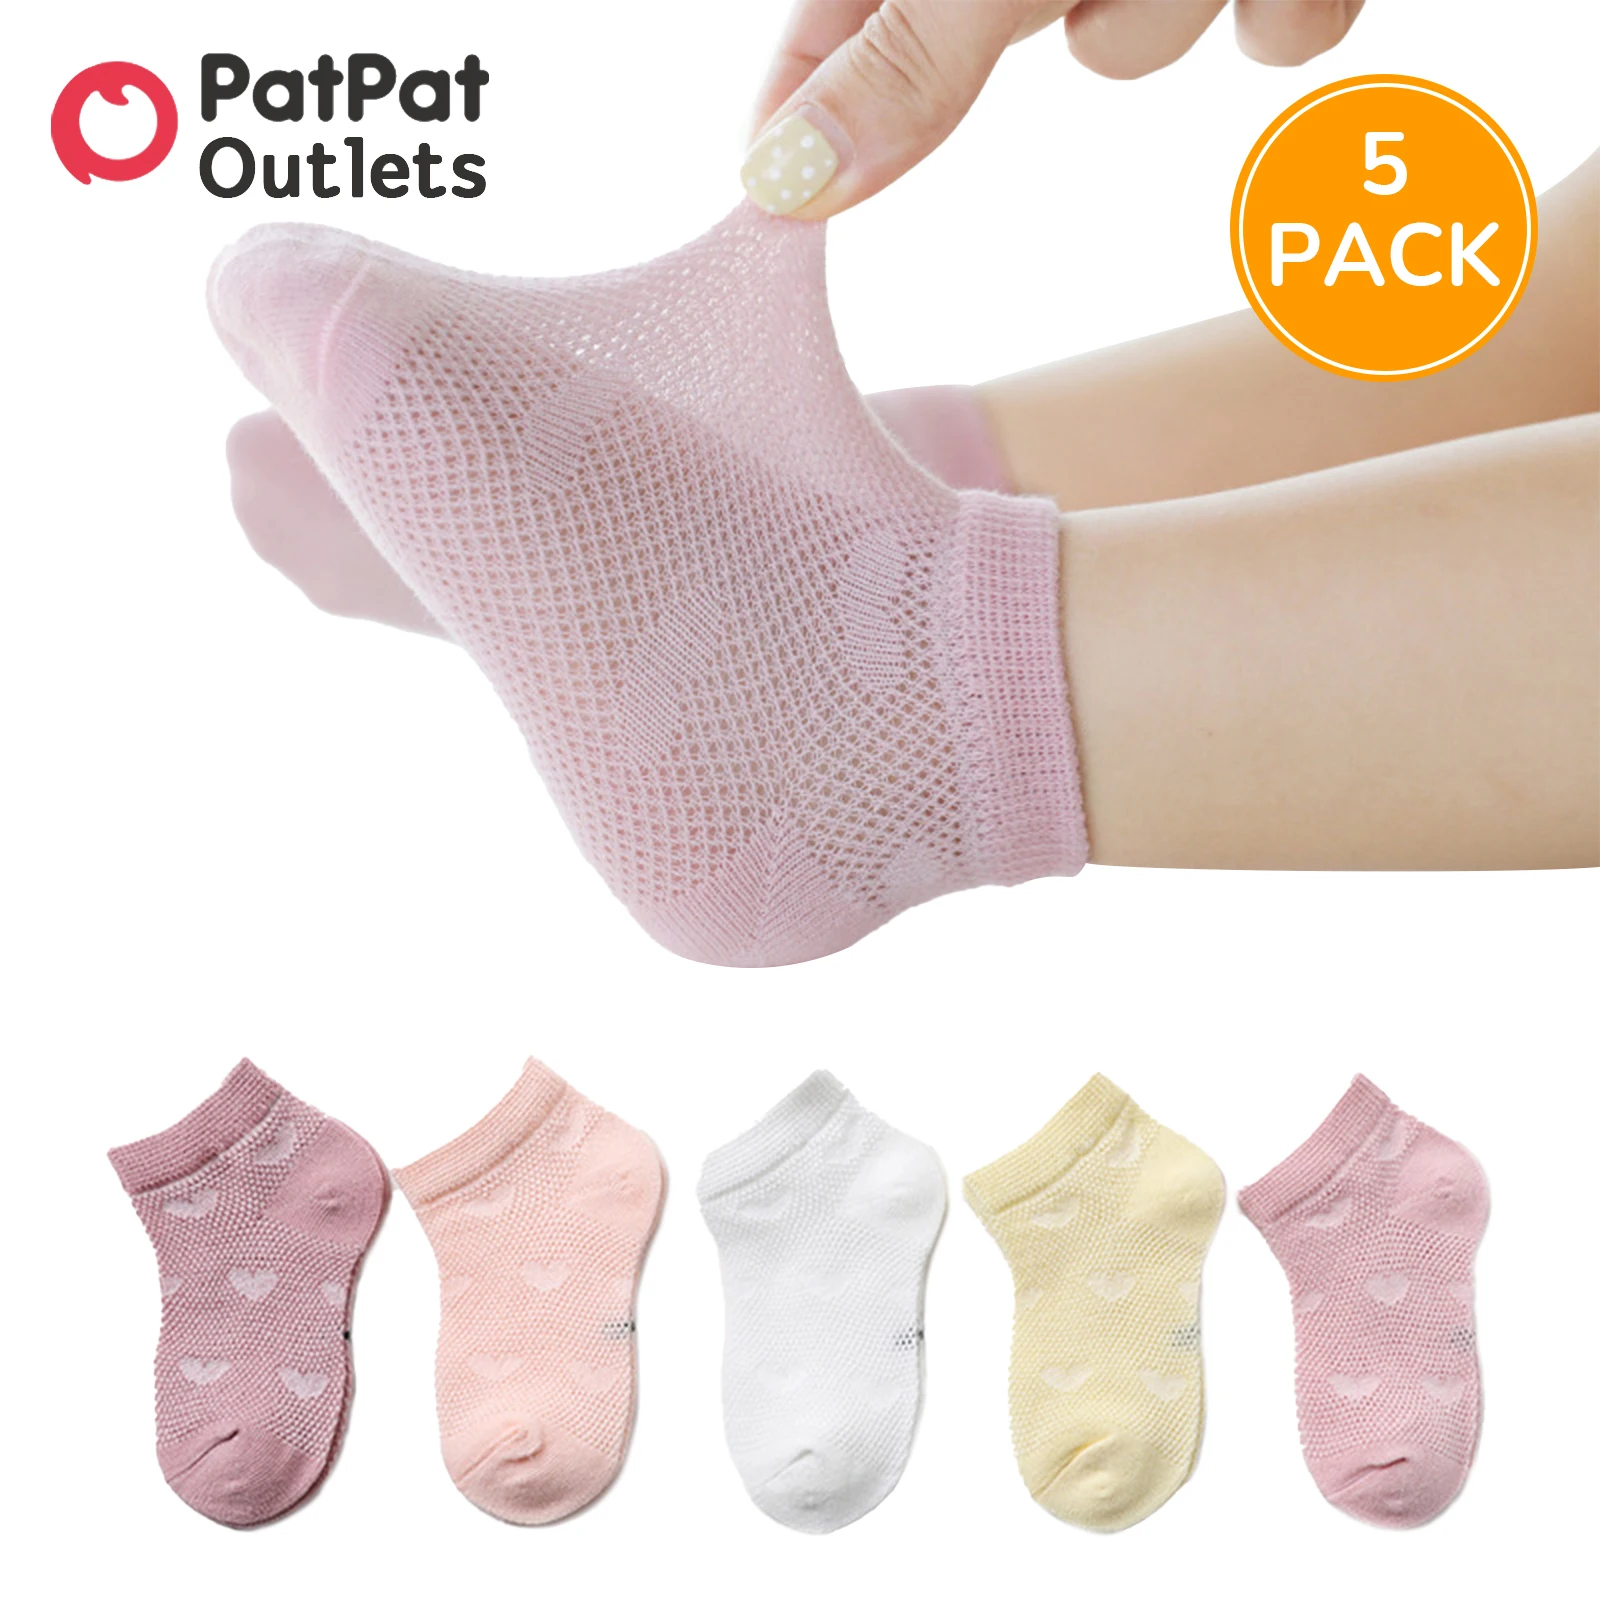 

PatPat 5-pairs Socks New Born Baby Accessories Kid Girl Clothes Things for Babies Newborn Toddler Soft Breathable Mesh Socks